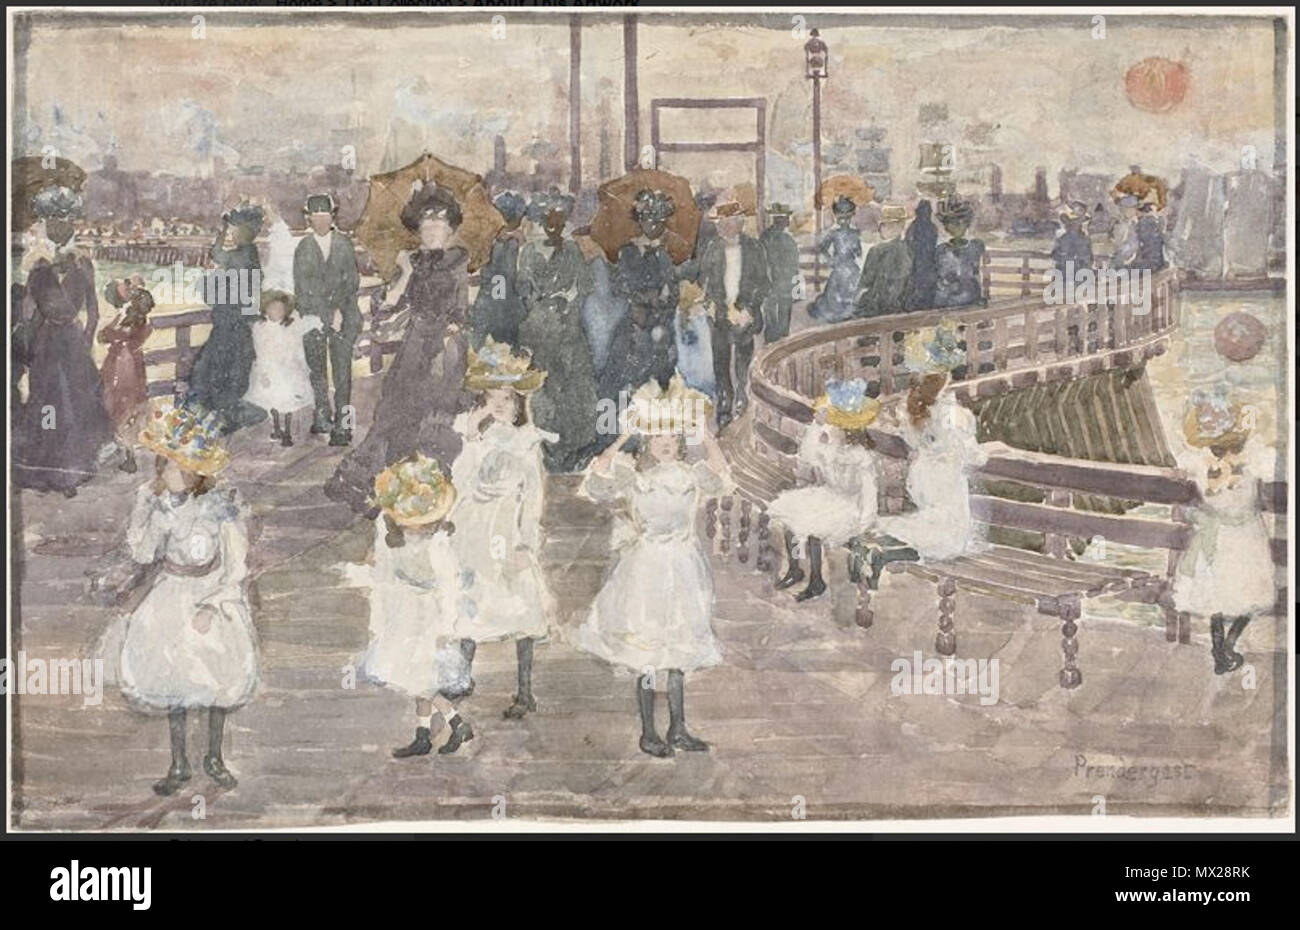 . South Boston Pier, c. 1898. By Maurice Brazil Prendergast. Watercolor over graphite, with traces of white gouache, on ivory wove paper. Art Institute of Chicago. 1898. Prendergast 11 1898 SouthBostonPier byPrendergast ARTIC Stock Photo